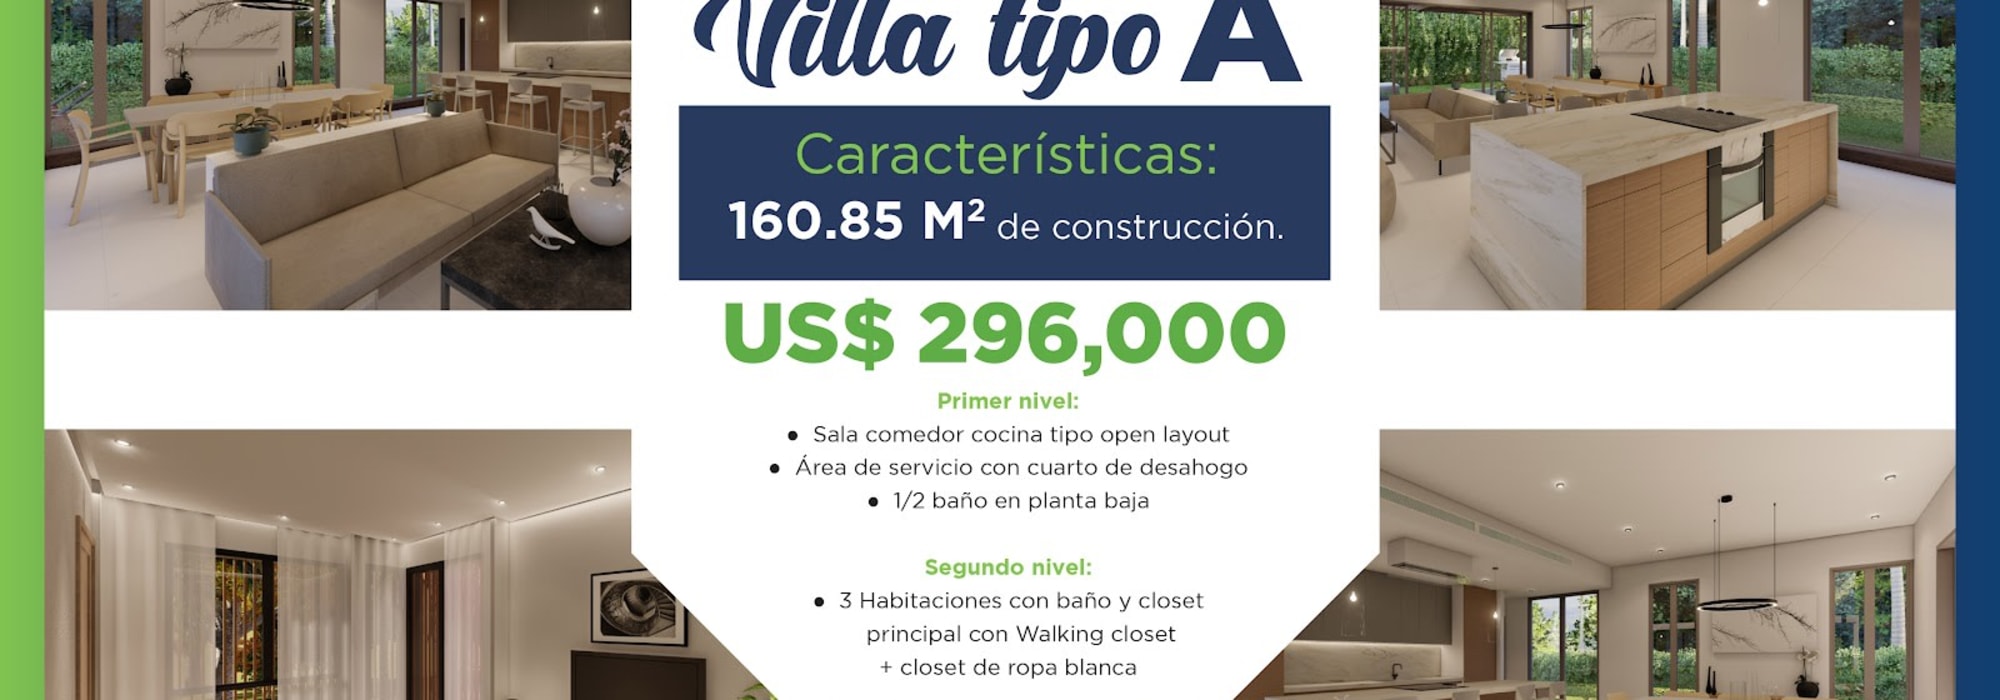 Project in Vista Cana